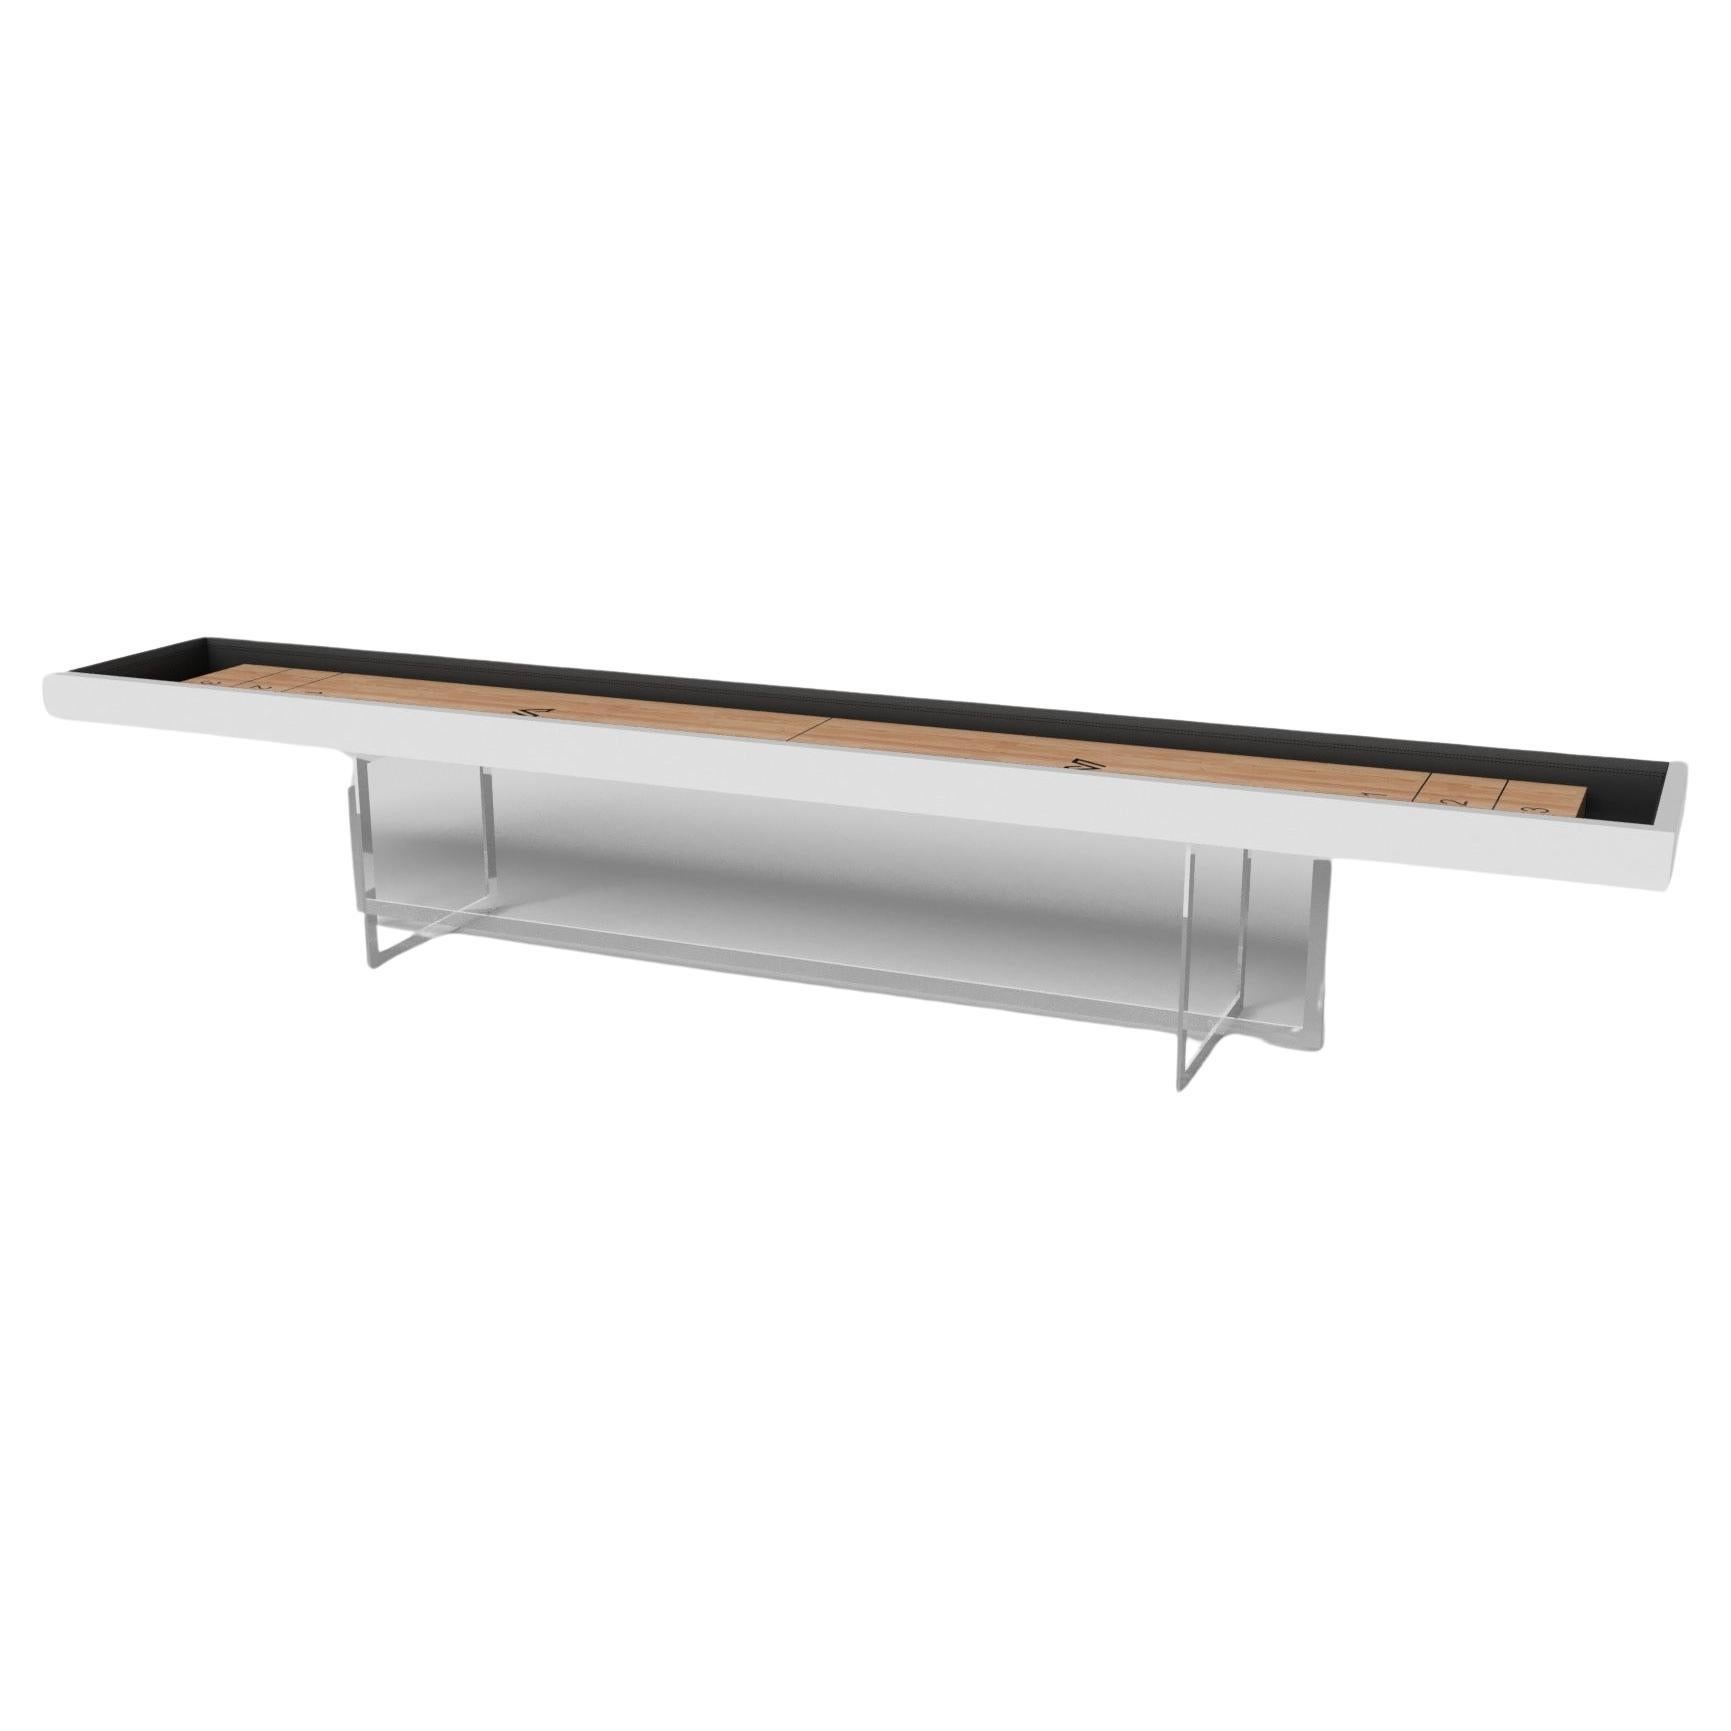 Elevate Customs Beso Shuffleboard Tables / Solid Pantone White Color in 9' - USA